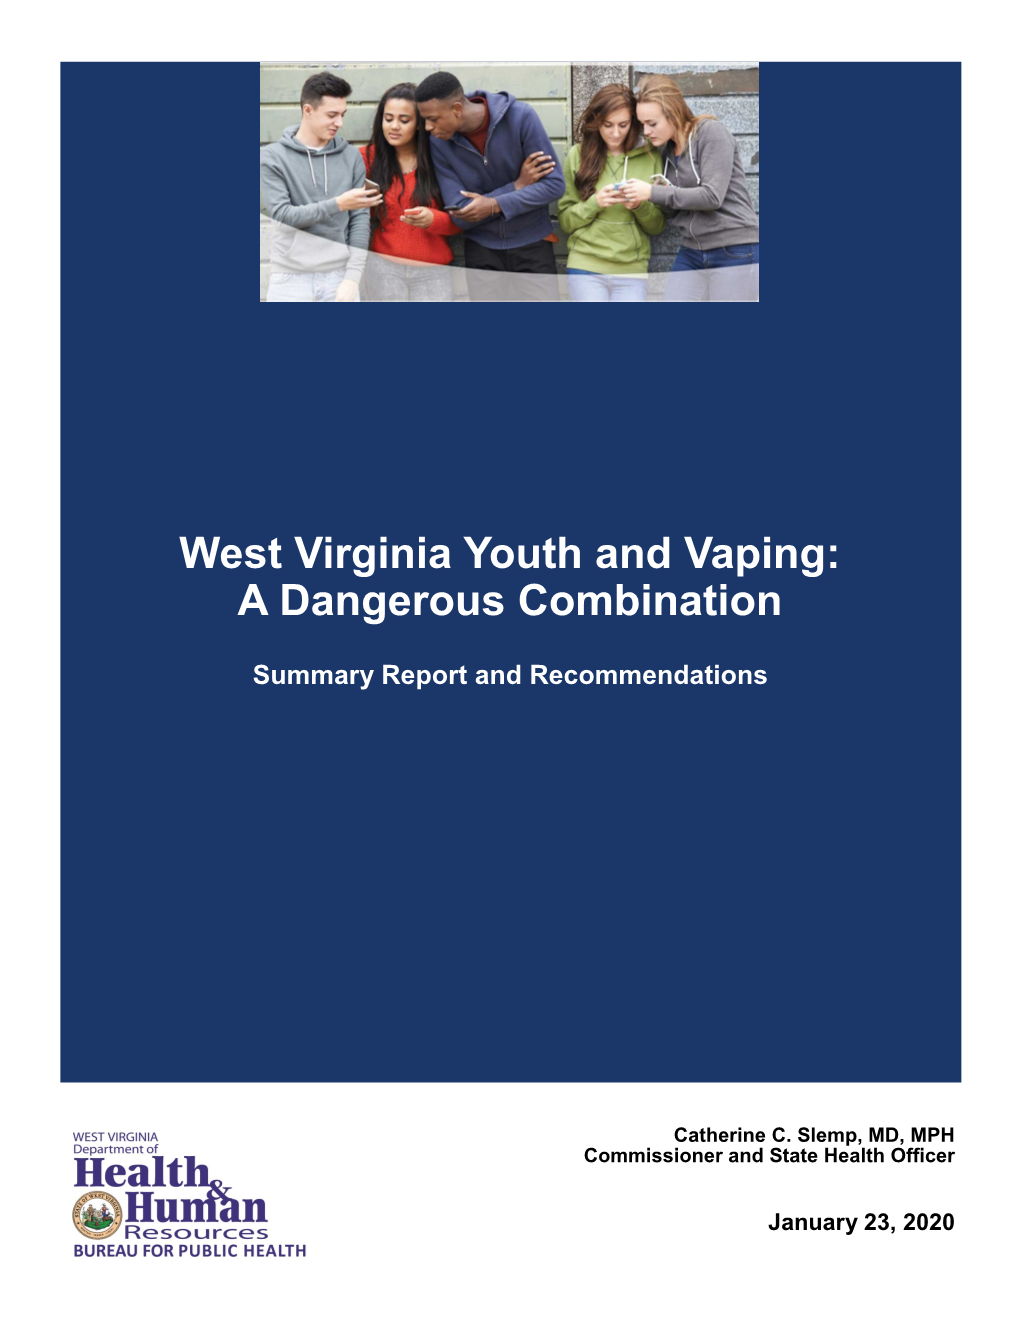 Report: West Virginia Youth and Vaping: a Dangerous Combination